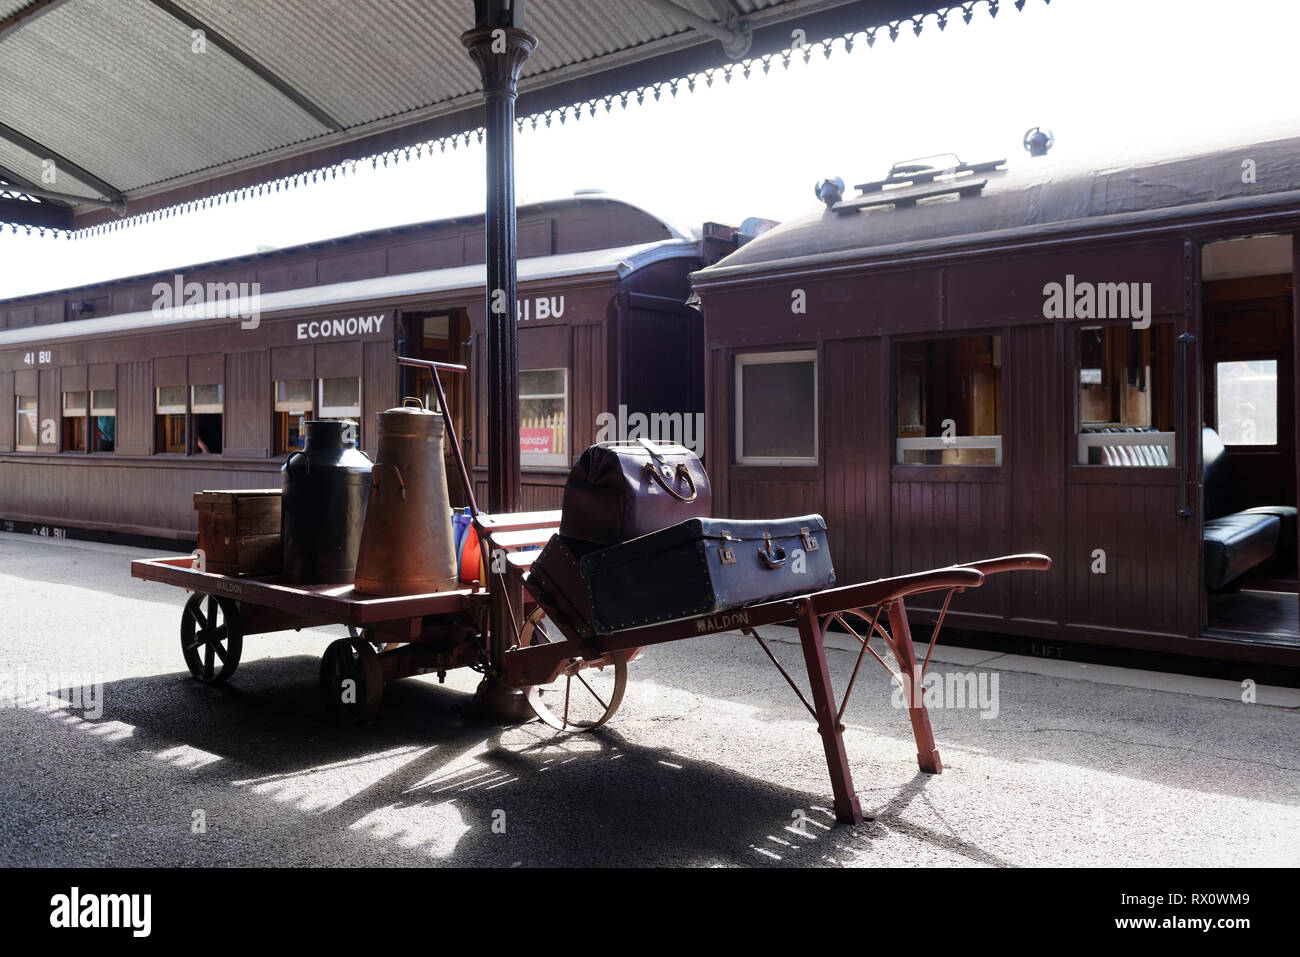 Old style luggage on porters’ trolley and cart on the platform, Maldon Railway station, Victoria, Australia. Opened in 1884, the historic station serv Stock Photo